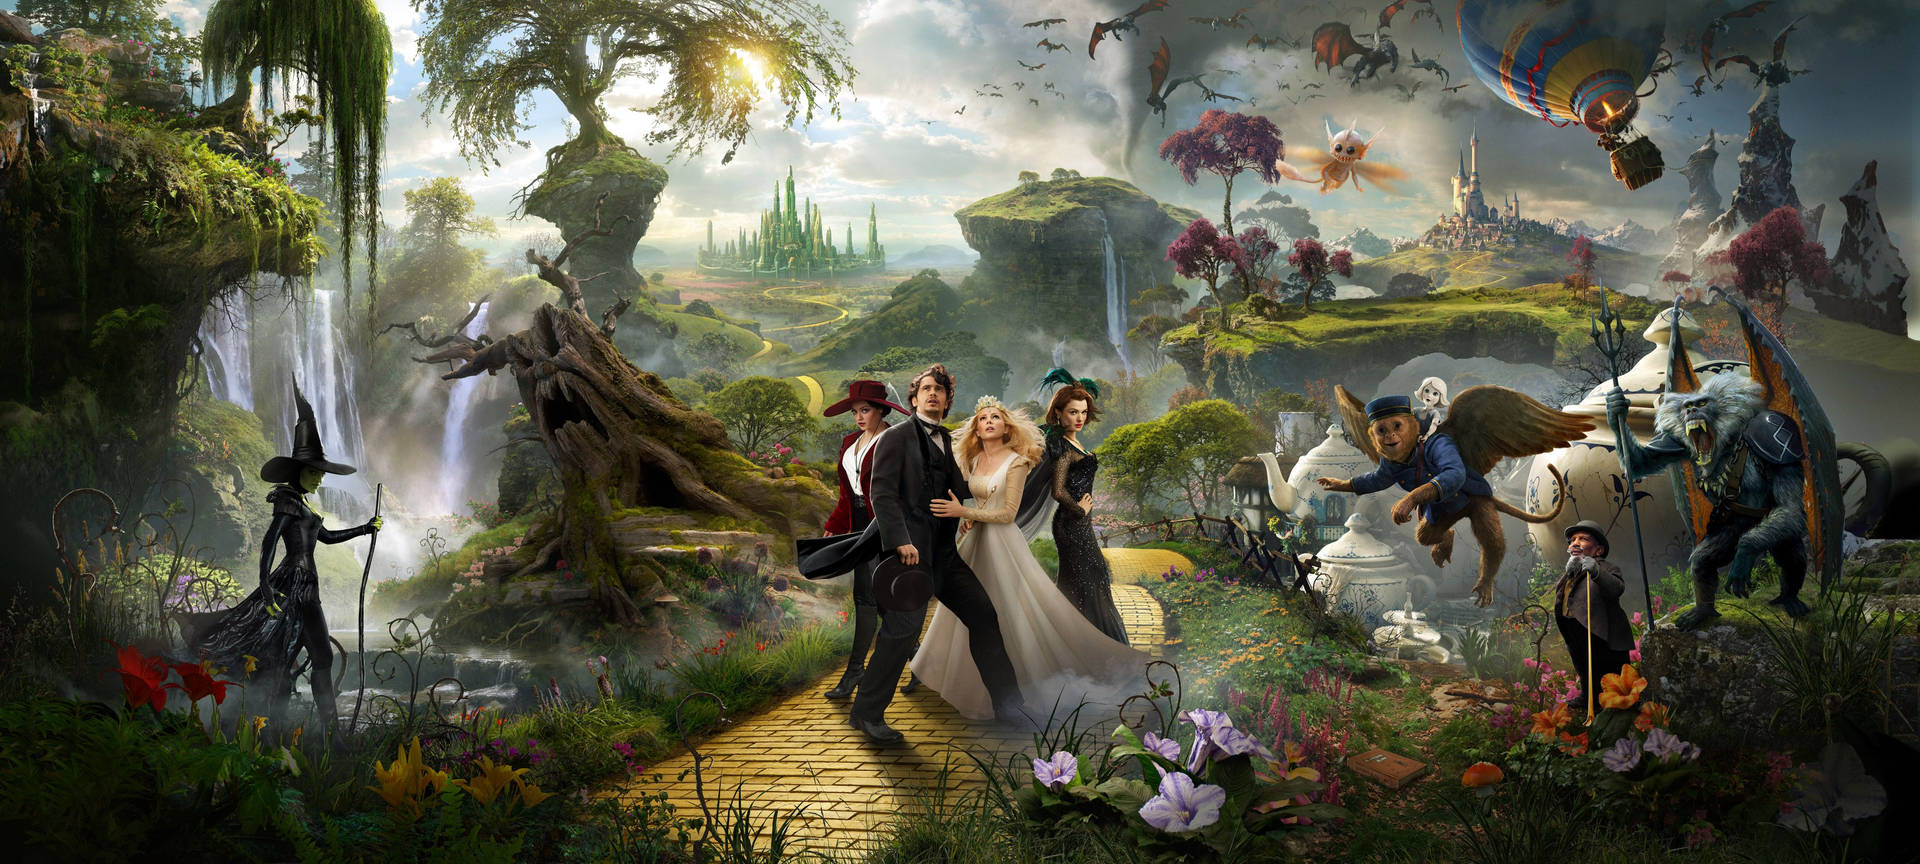 Oz The Great And Powerful Background Wallpaper